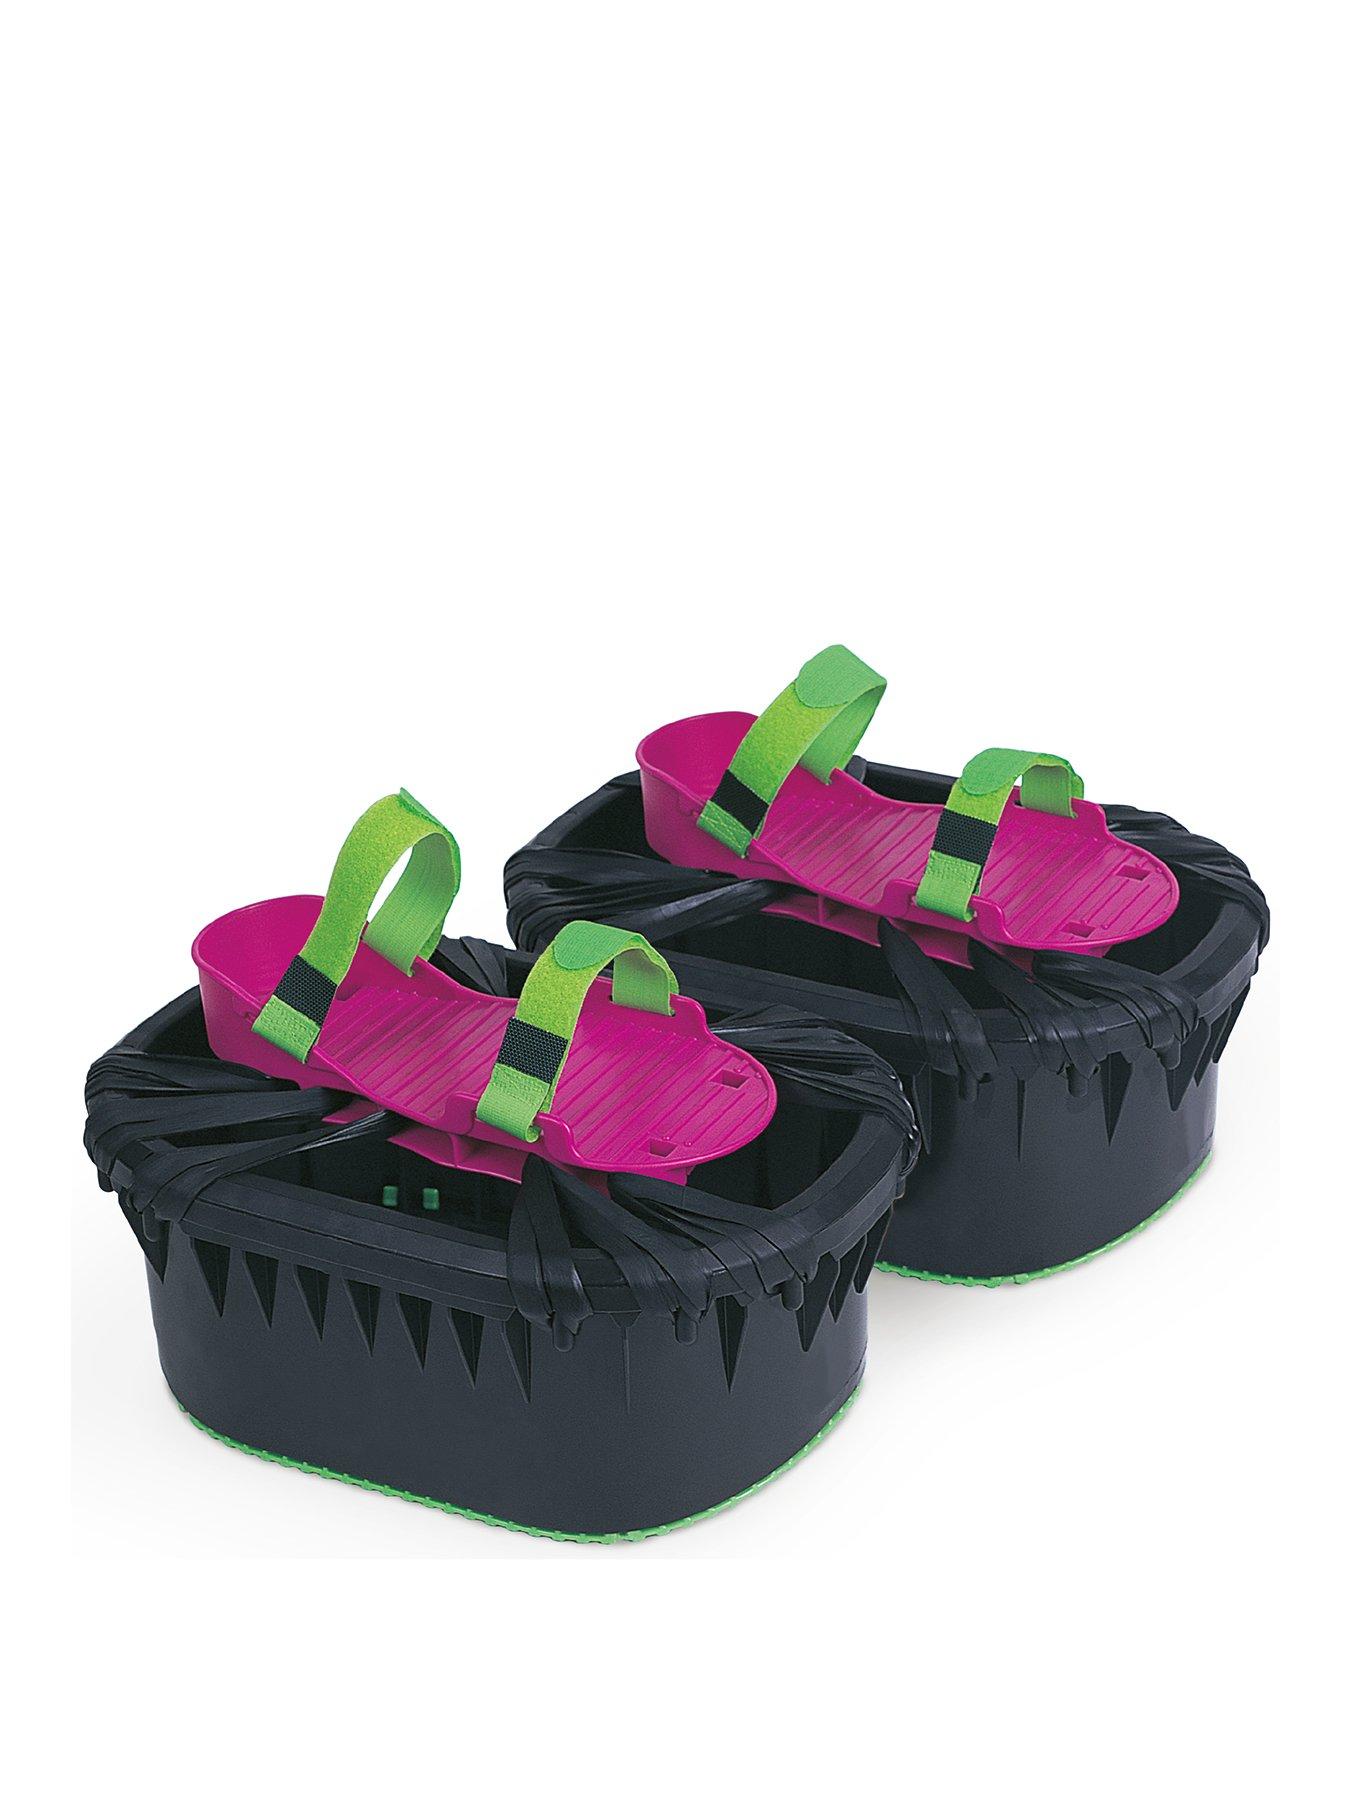 Moon Shoes Bouncy Shoes, Mini Trampolines for Your Feet, One Size, Black,  New and Improved, Bounce Your Way to Fun, Very Durable, No Tool Assembly